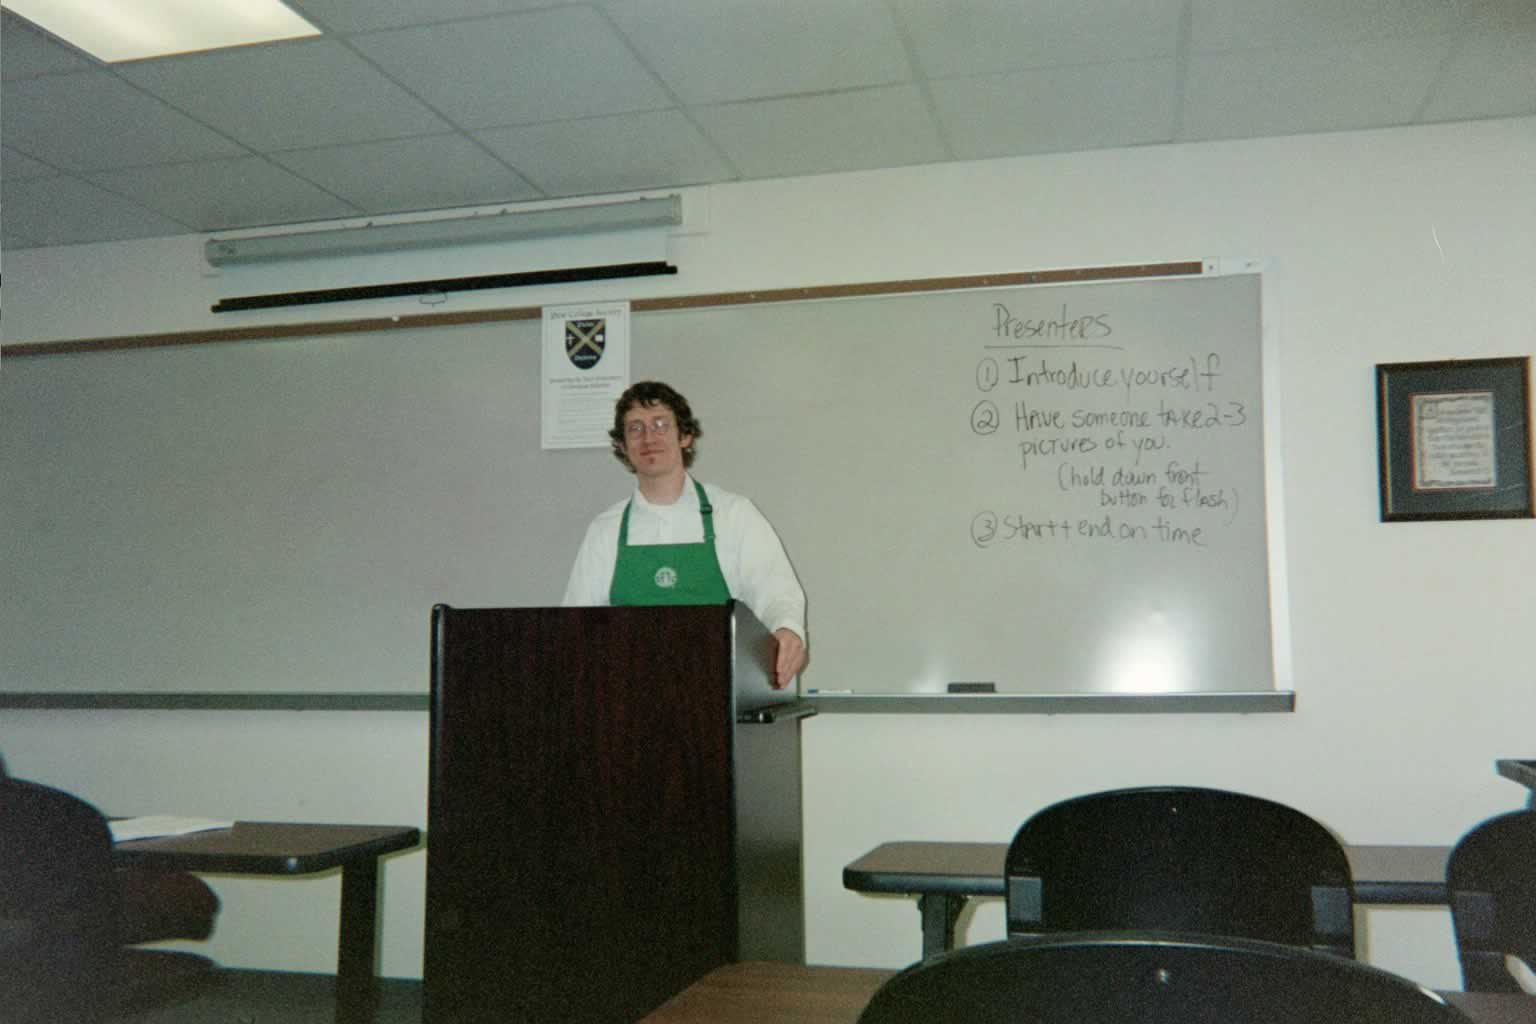 picture of a man with glasses standing behind the podium while wearing an apron